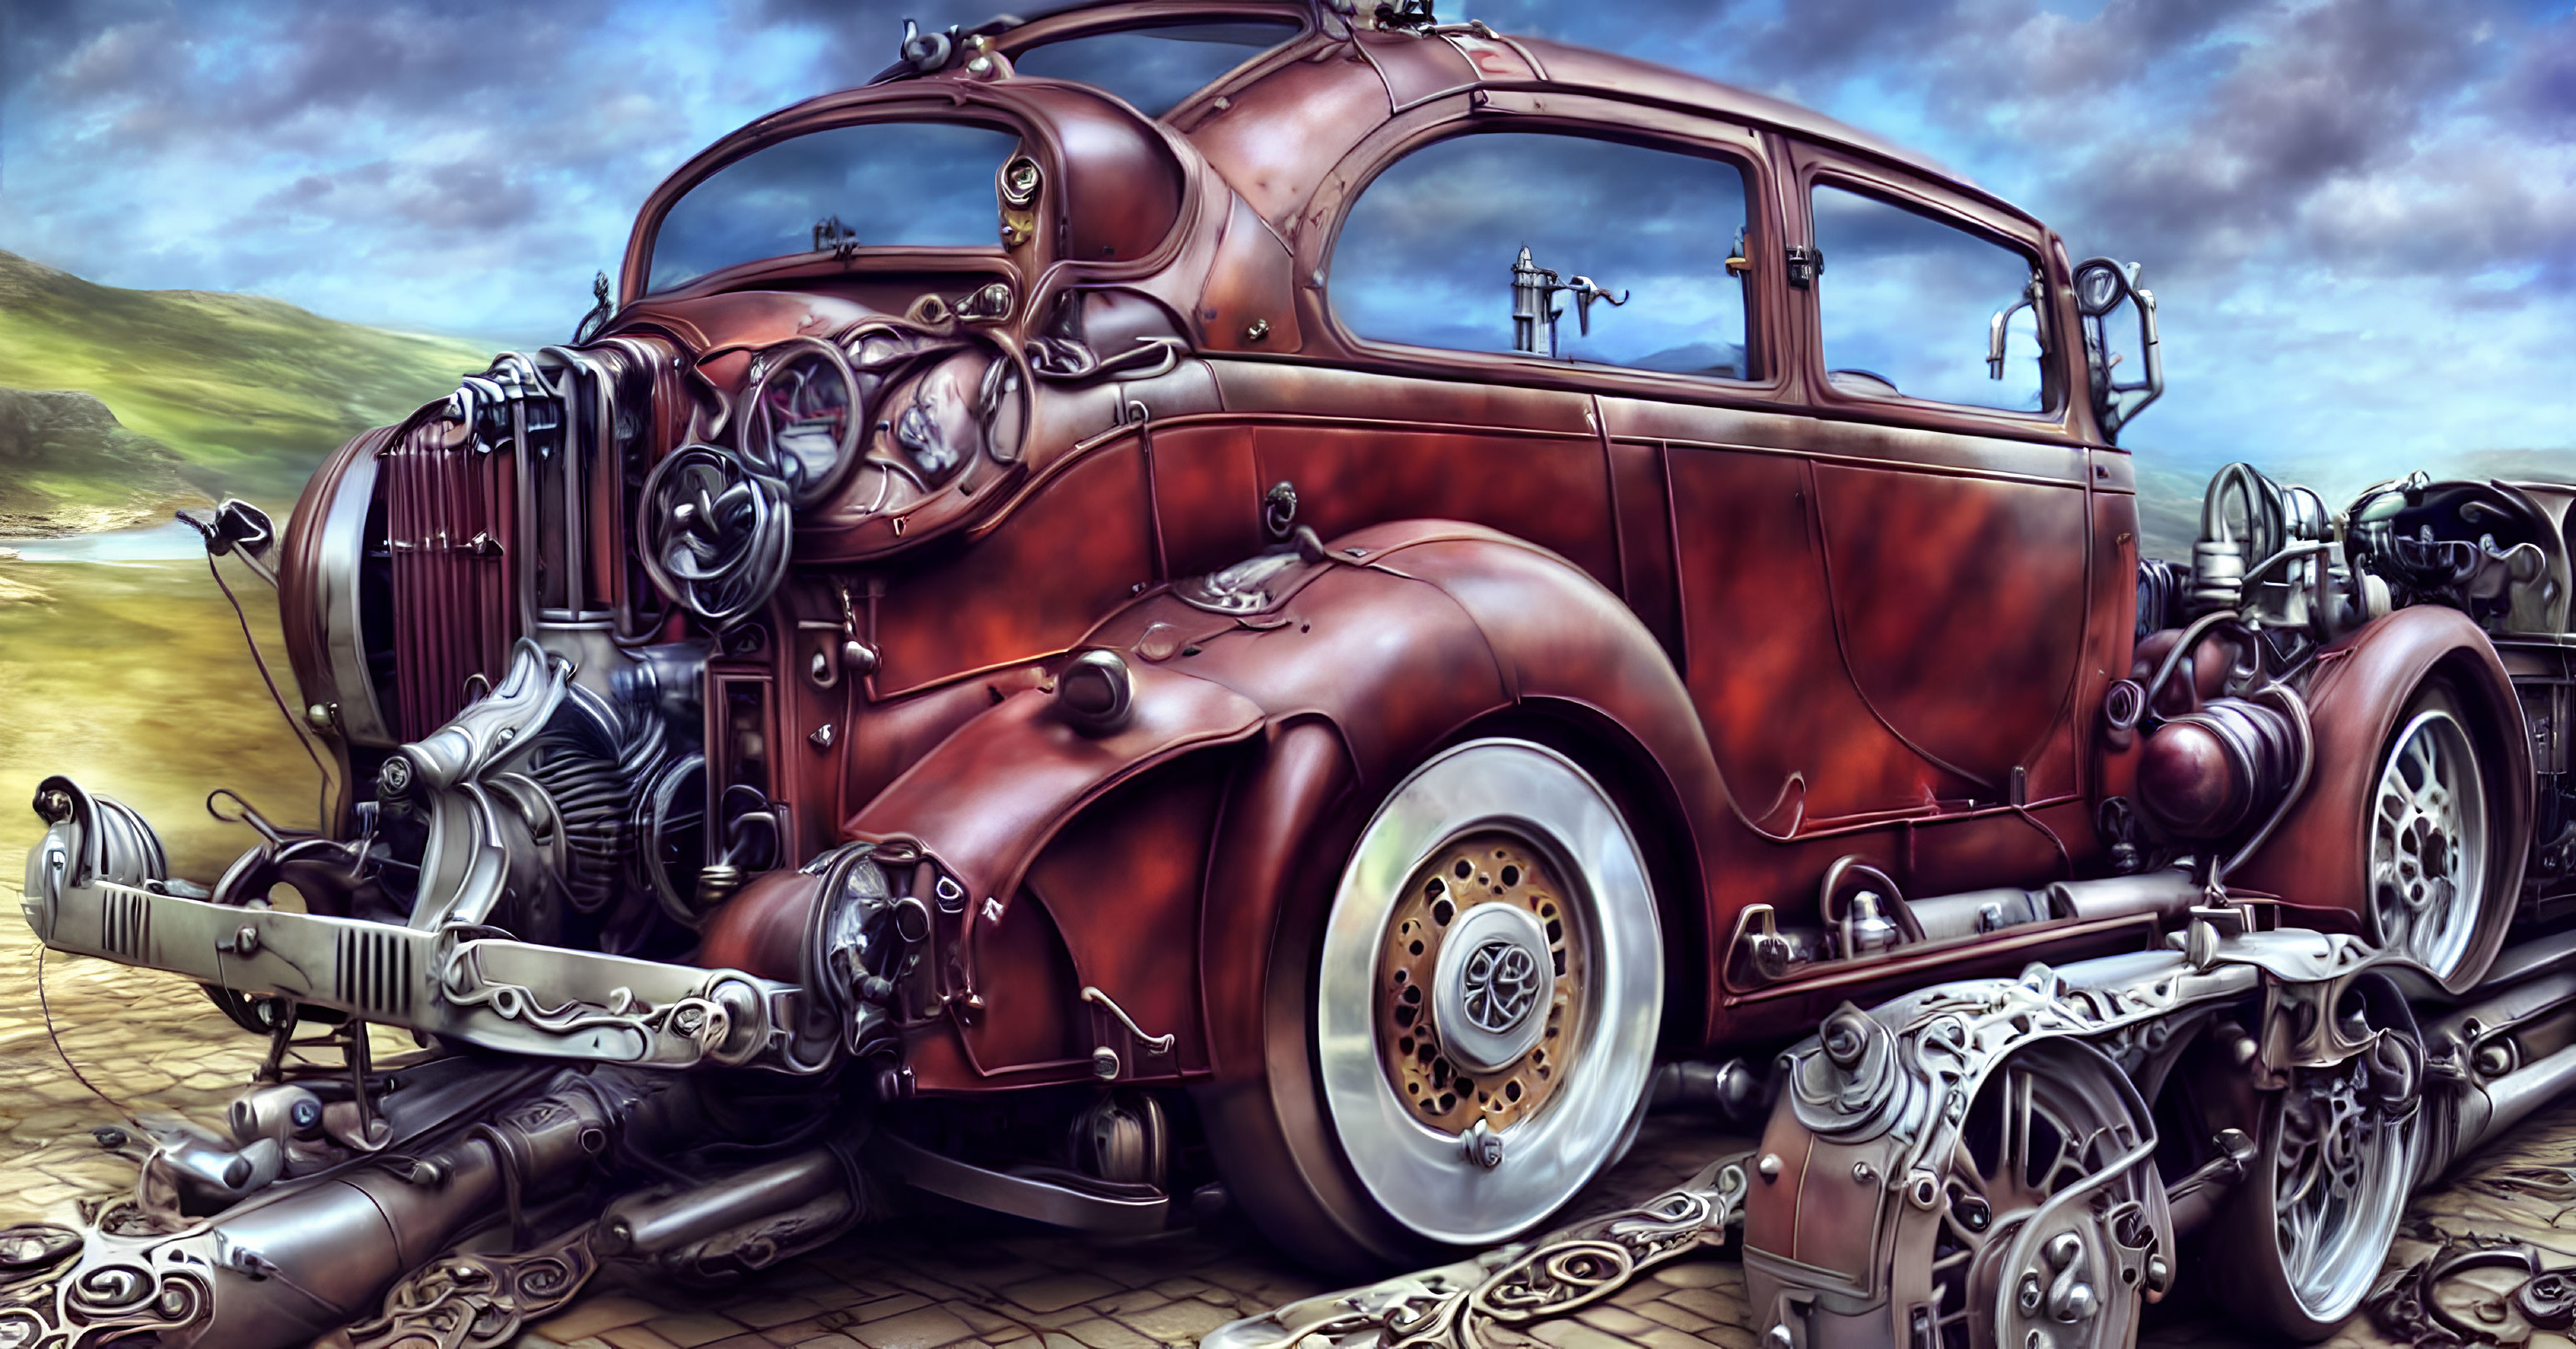 Red Vintage Car with Steampunk Aesthetic on Cloudy Background